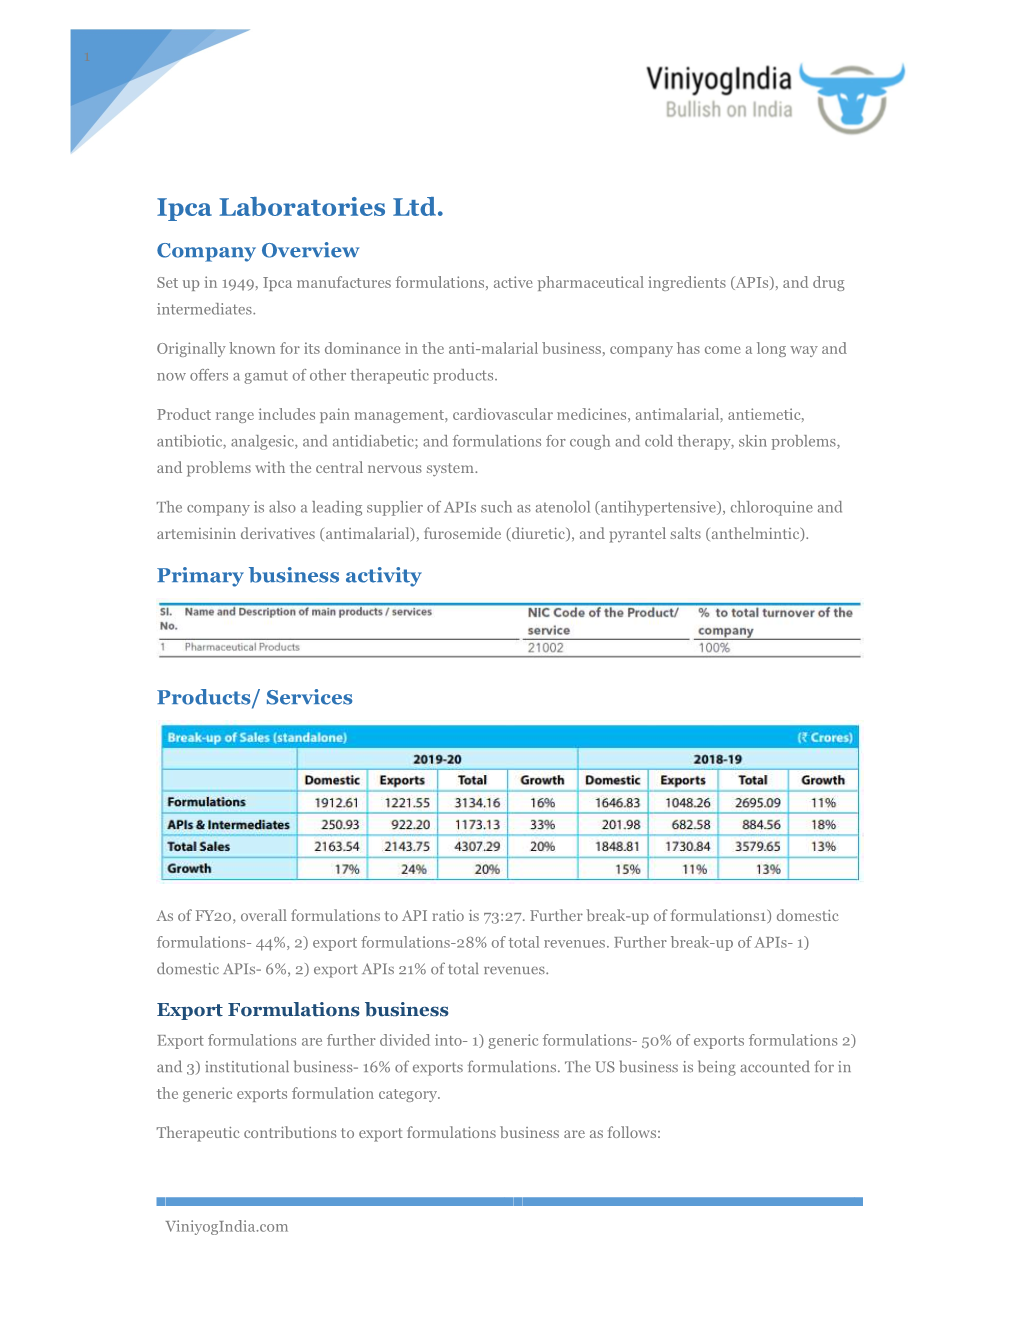 Ipca Laboratories Ltd. Company Overview Set up in 1949, Ipca Manufactures Formulations, Active Pharmaceutical Ingredients (Apis), and Drug Intermediates